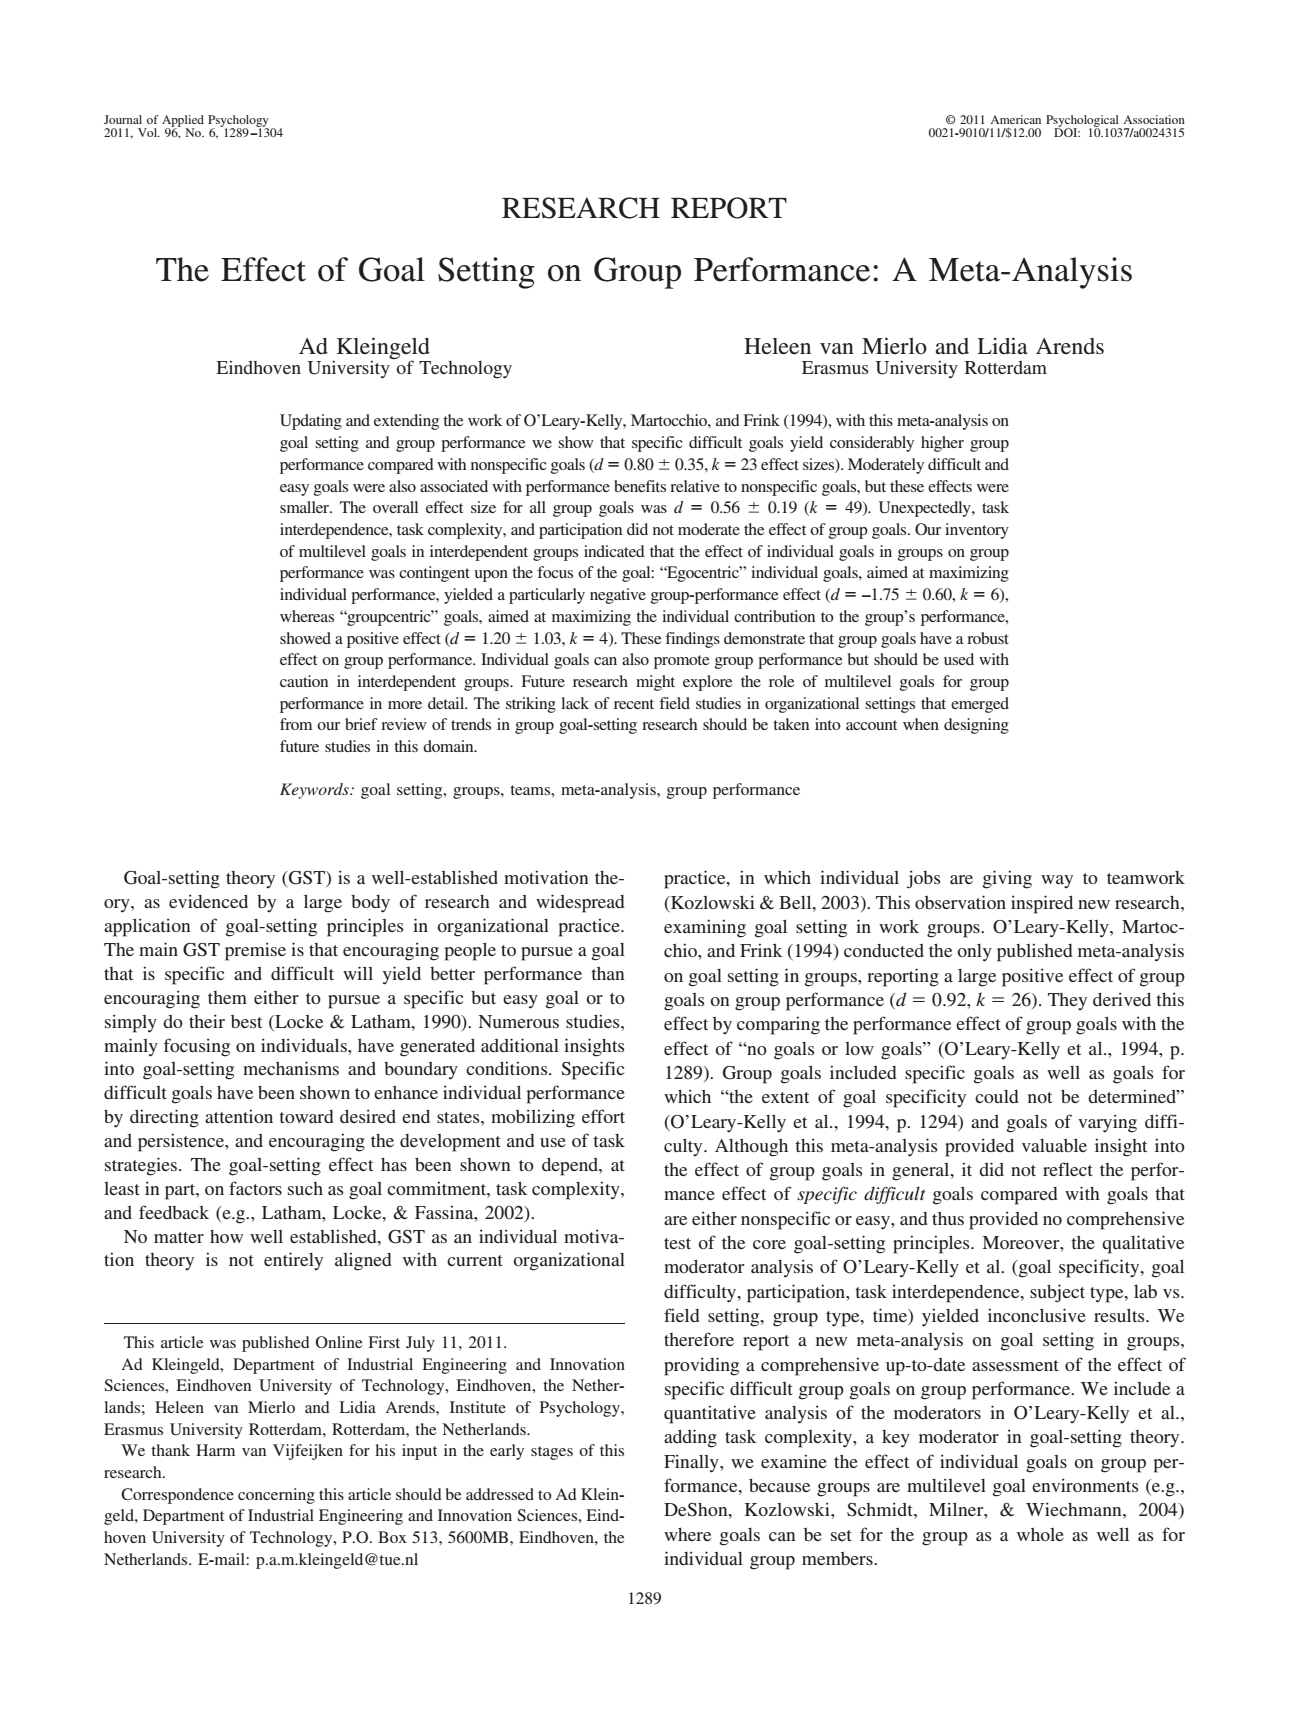 The effect of goal setting on group performance: A meta-analysis.